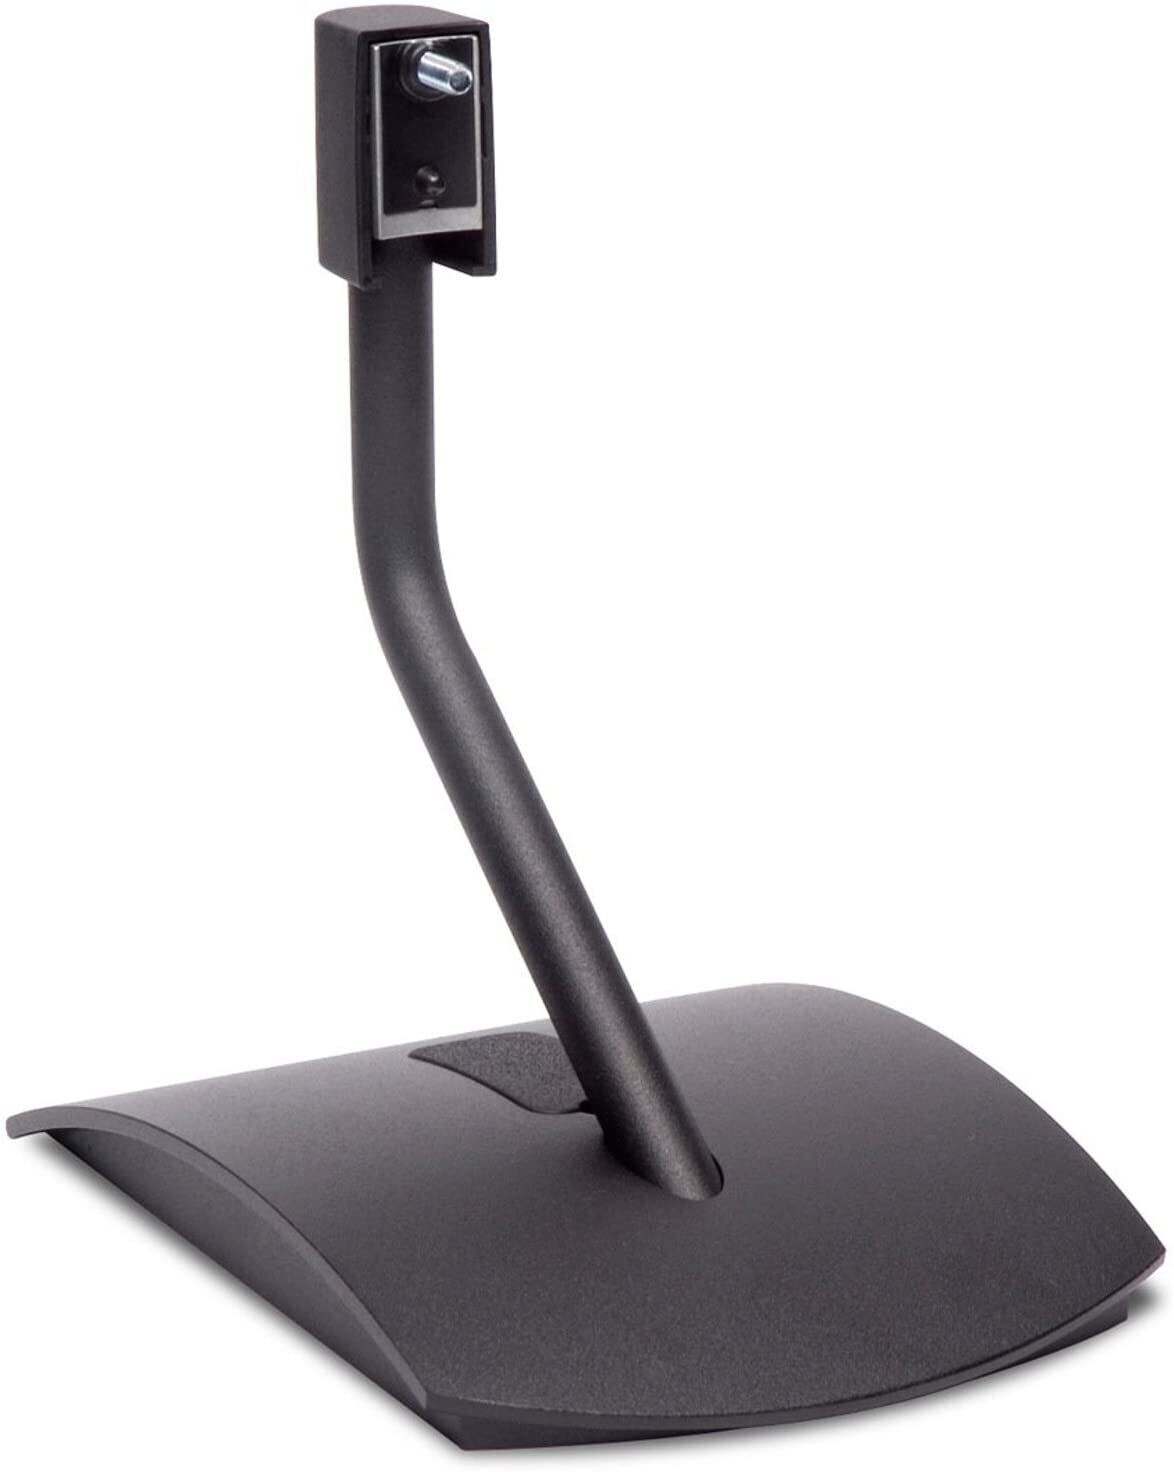 Bose Universal Table Stand for Bose cube speakers (single stand)